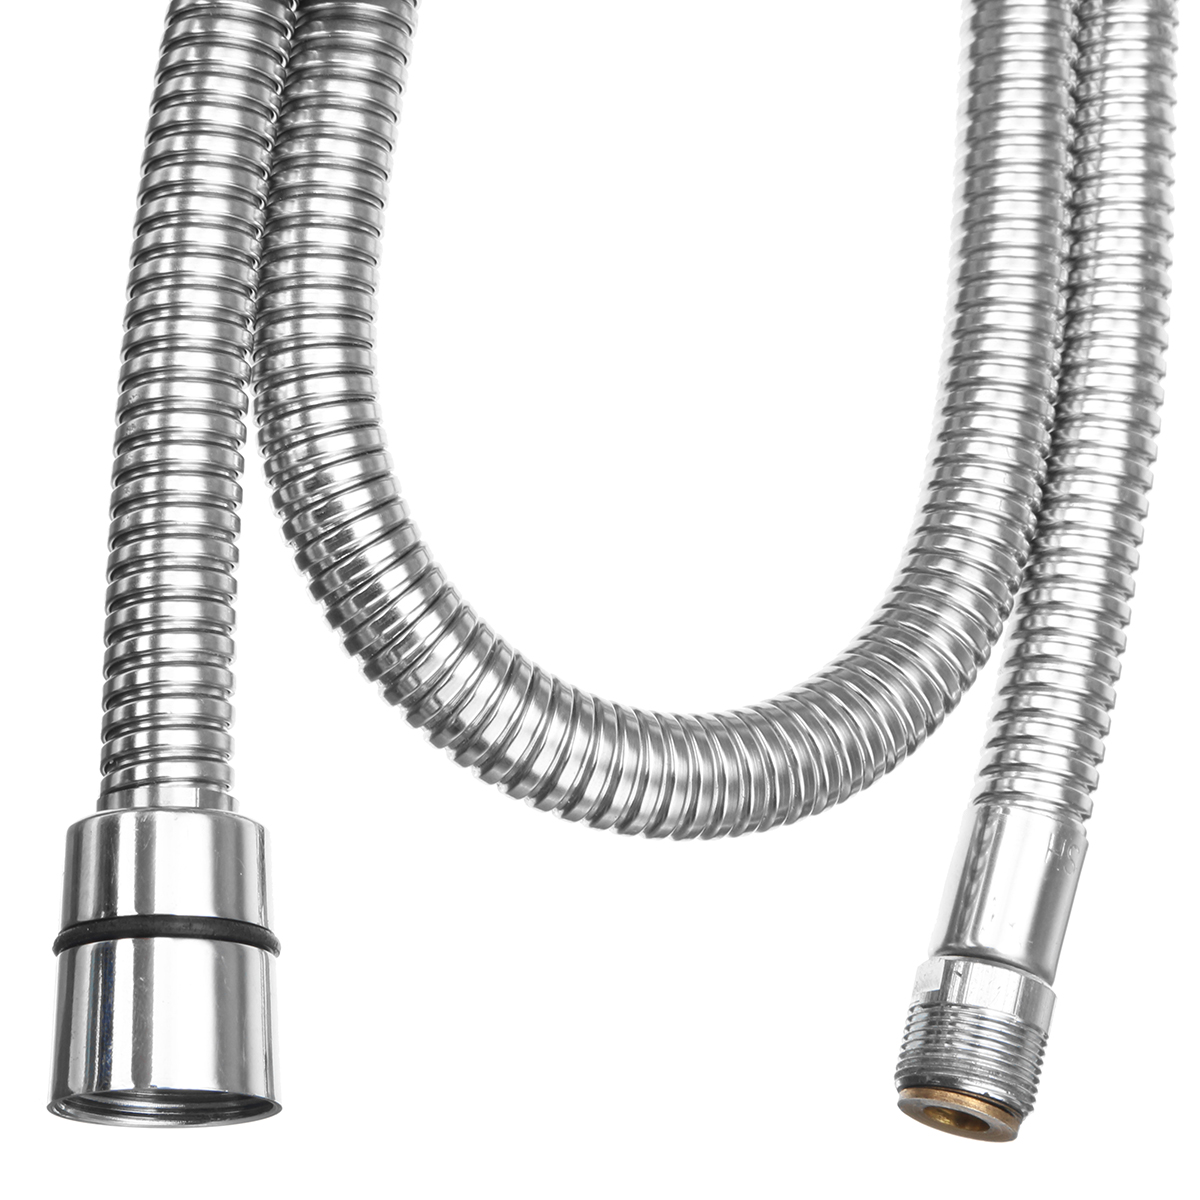 Flexible-Pull-Out-Spray-Water-Hose-Basin-Tap-Hose-Replacement-for-Home-Kitchen-Bath-1193432